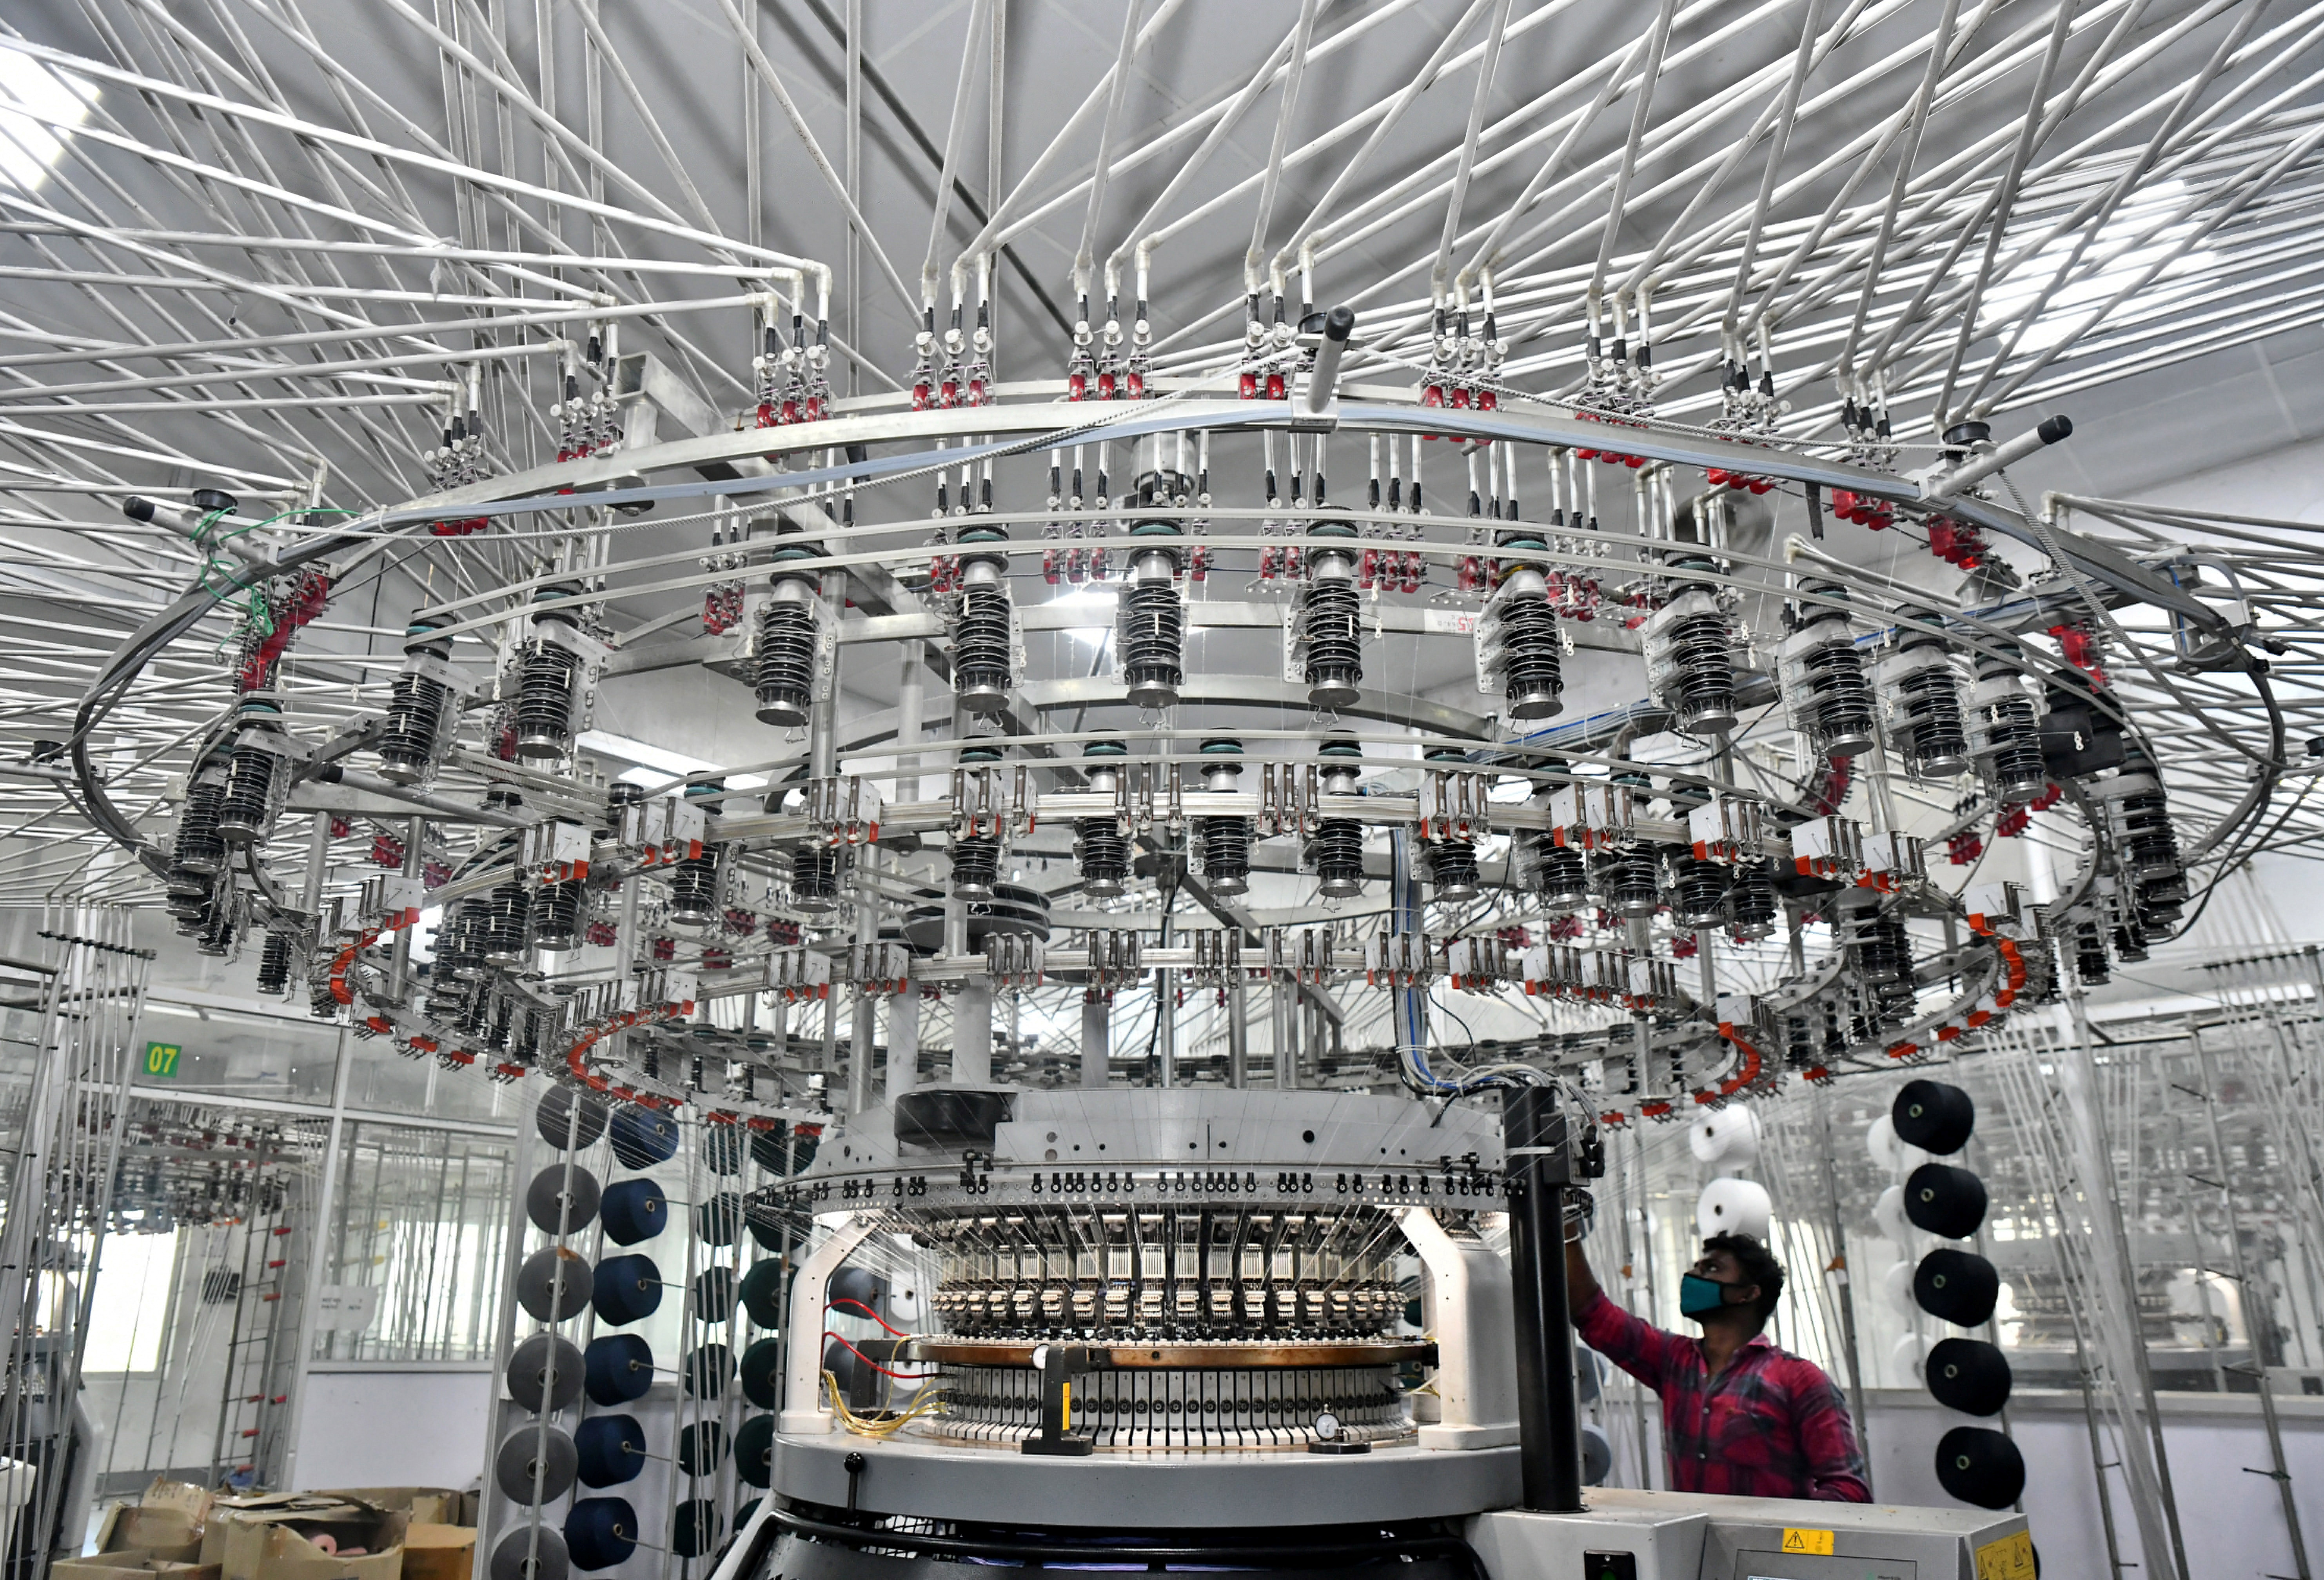 A worker operates a knitting machine at a textile factory of Texport Industries in Hindupur